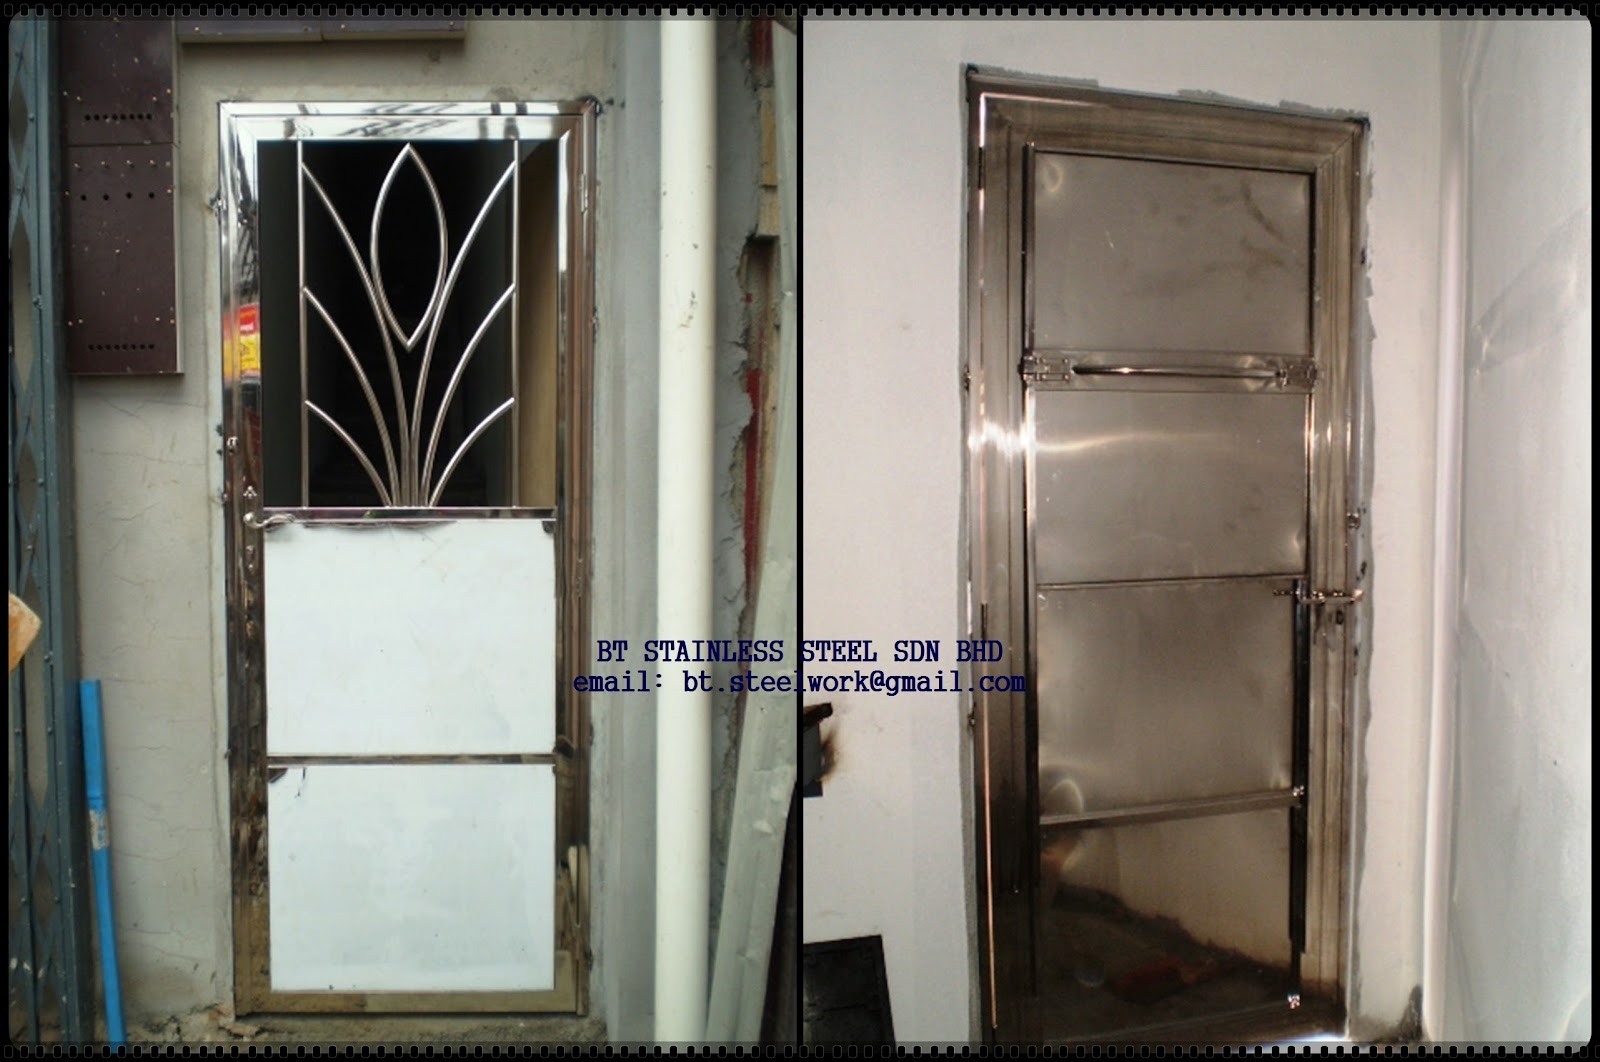 BT STAINLESS STEEL SDN BHD BT STEEL WORK CONTOH CONTOH 